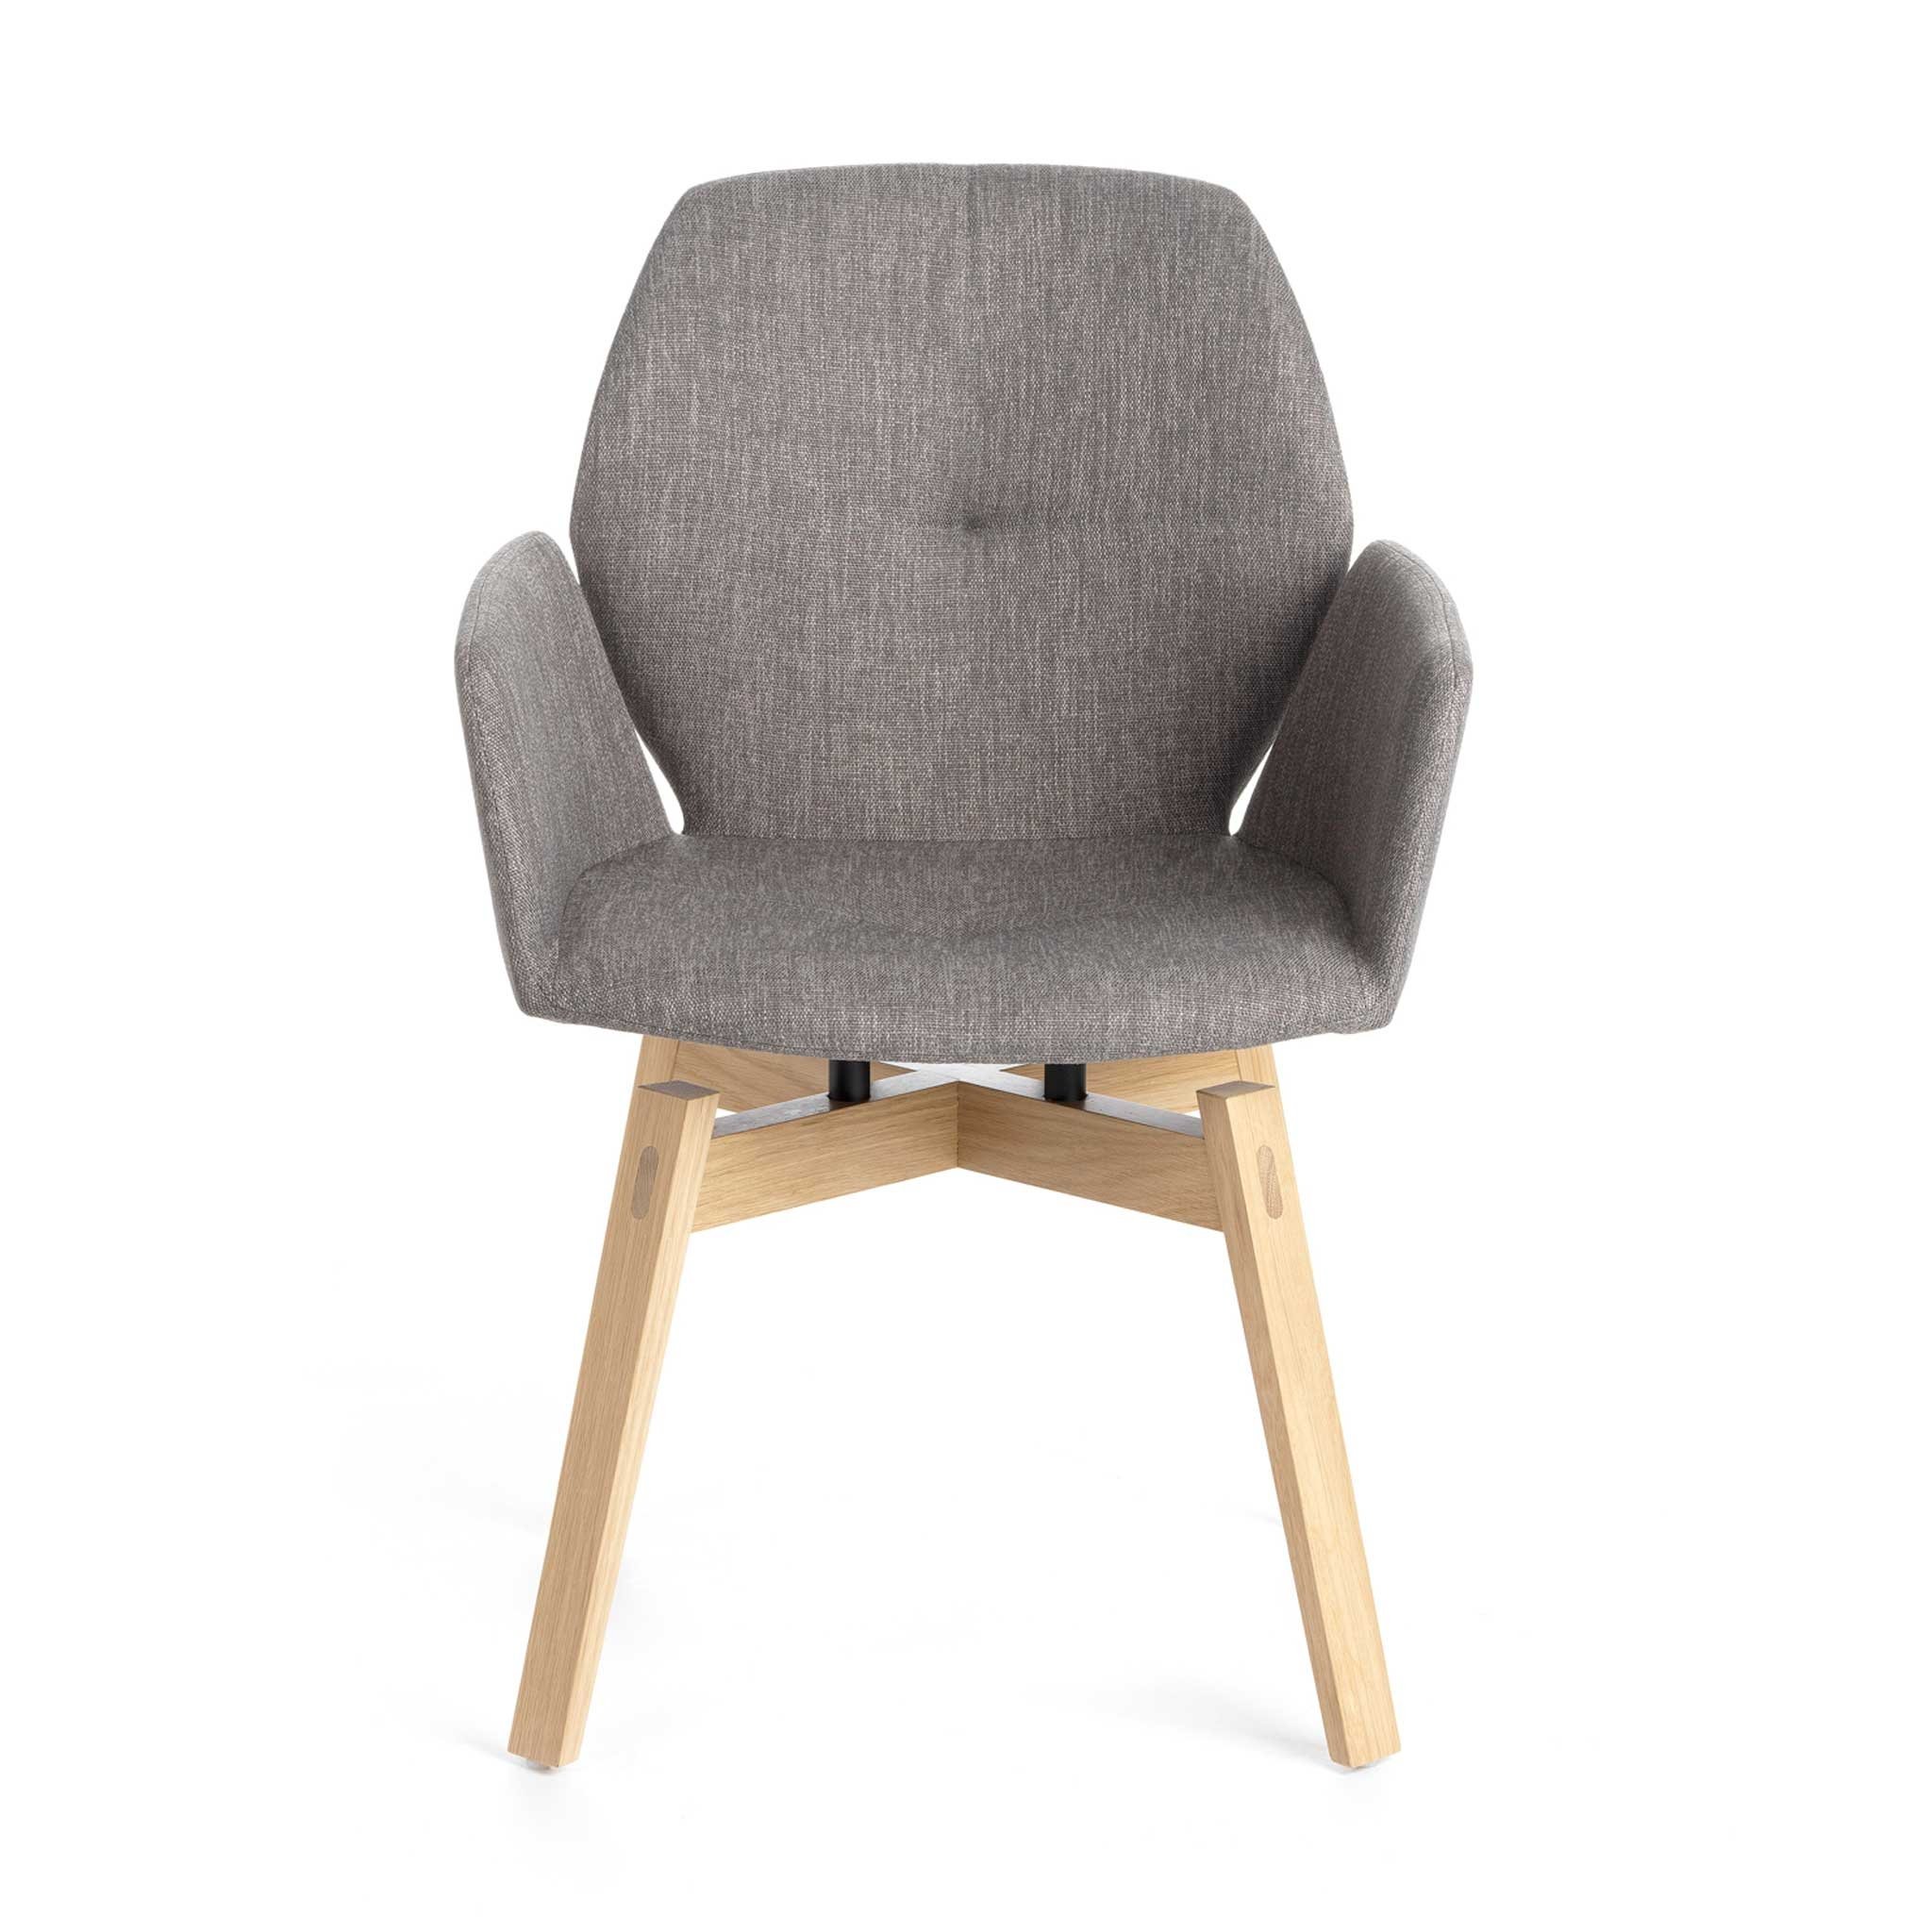 Jay 95 chairs - wooden legs